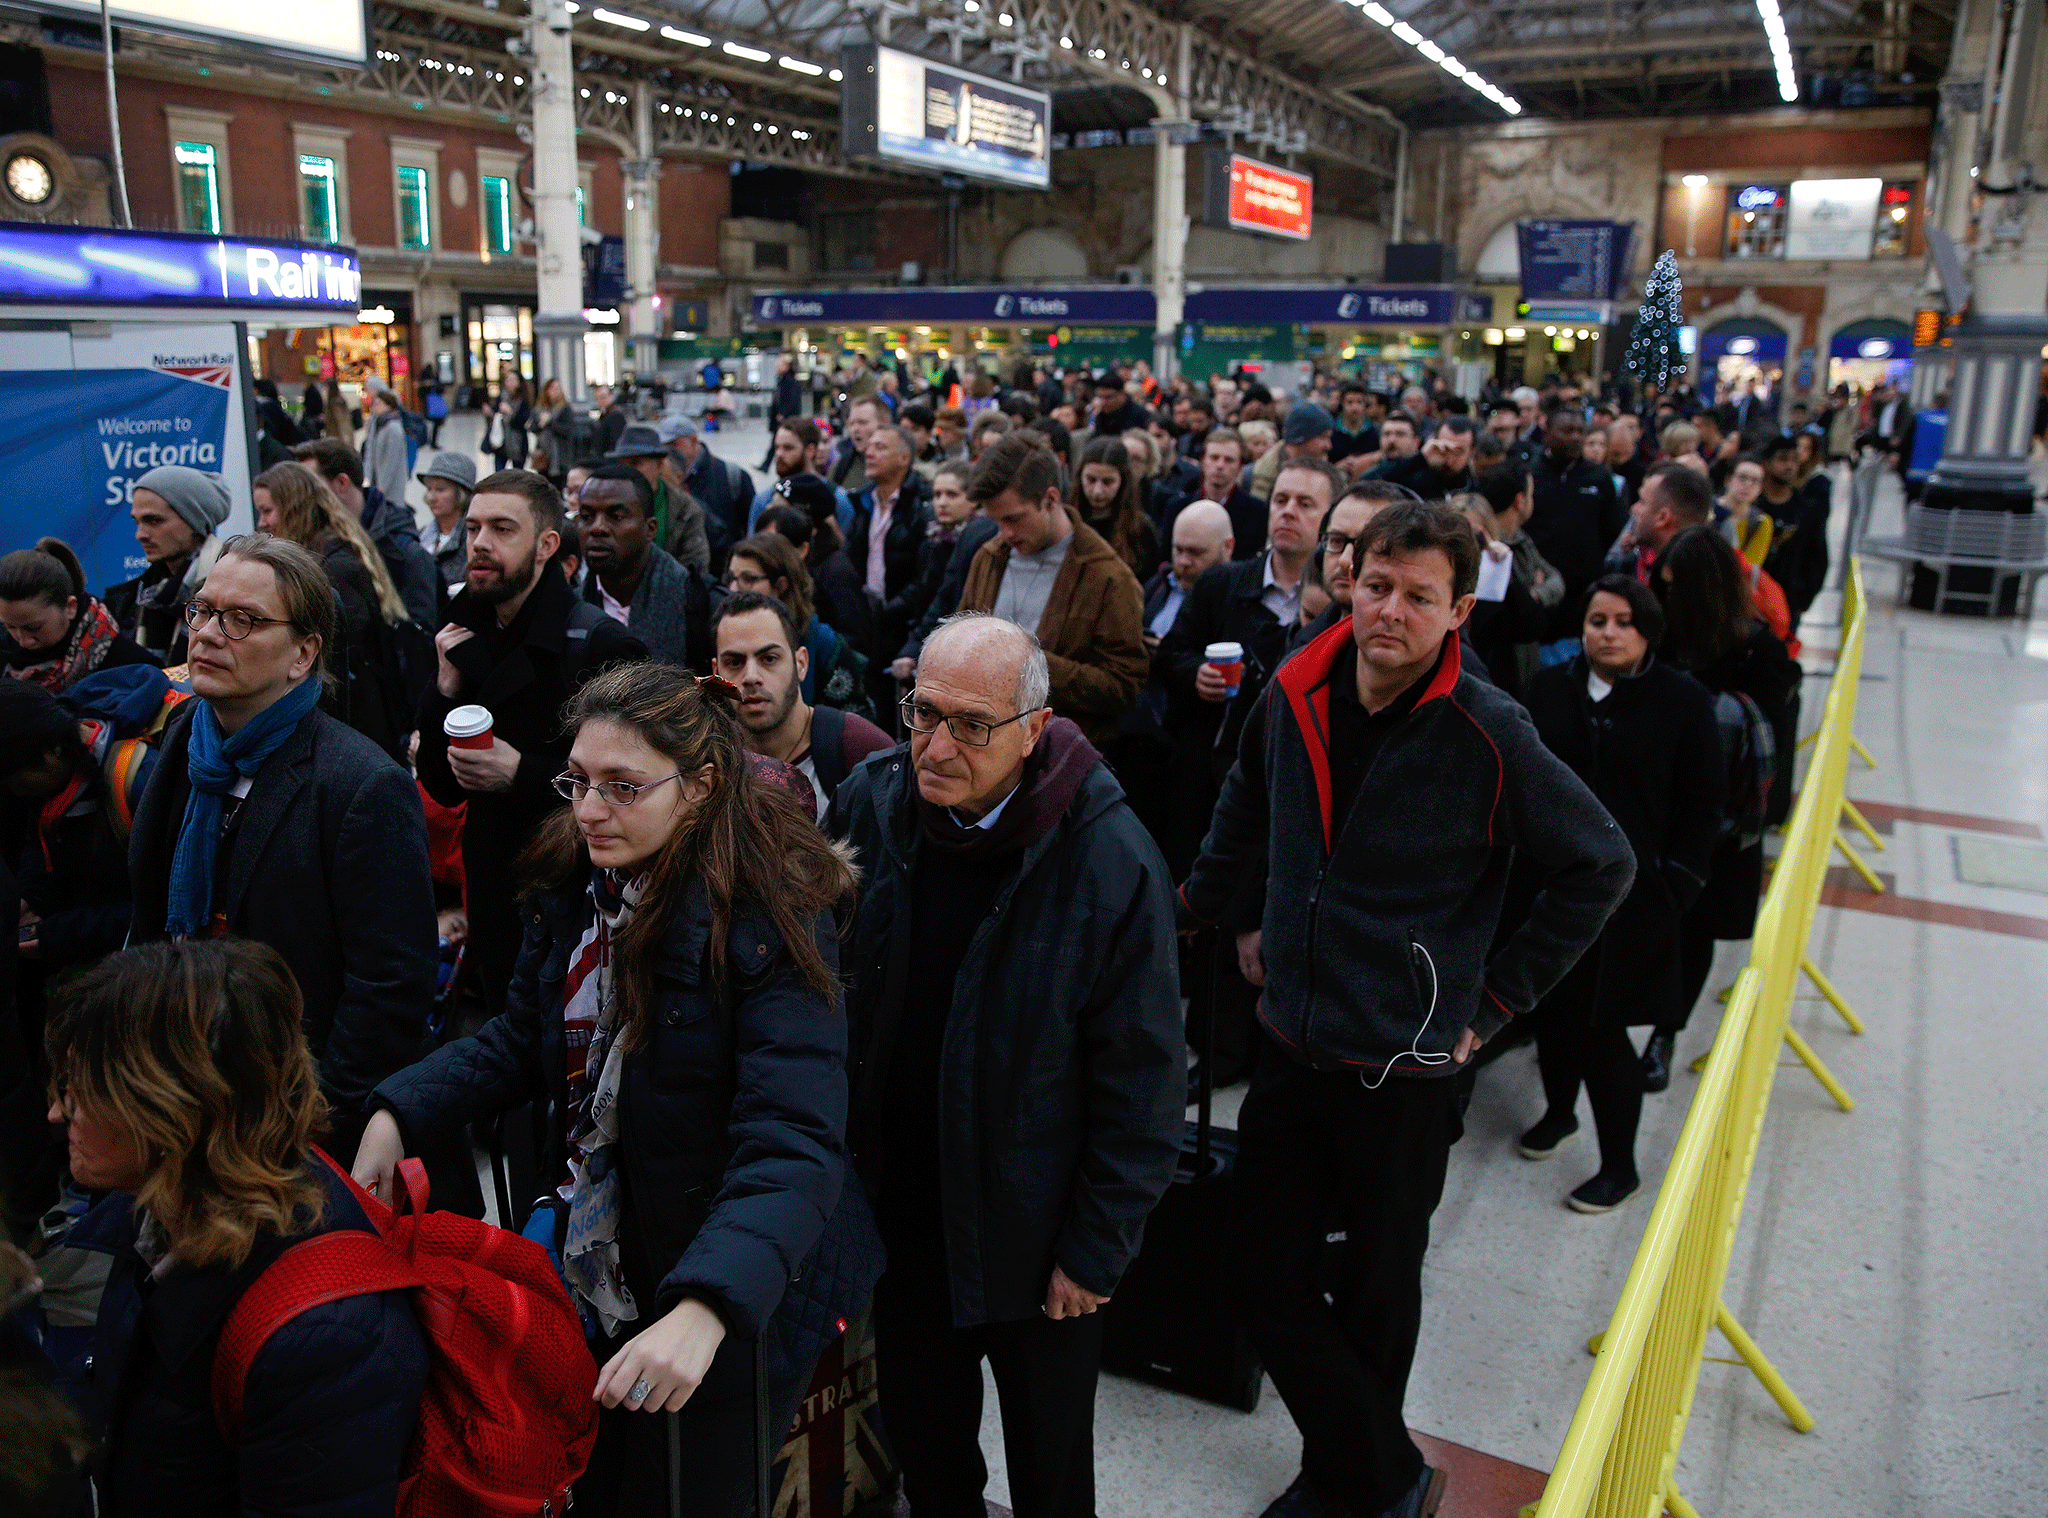 Southern Rail owner warns of profit hit from strikes